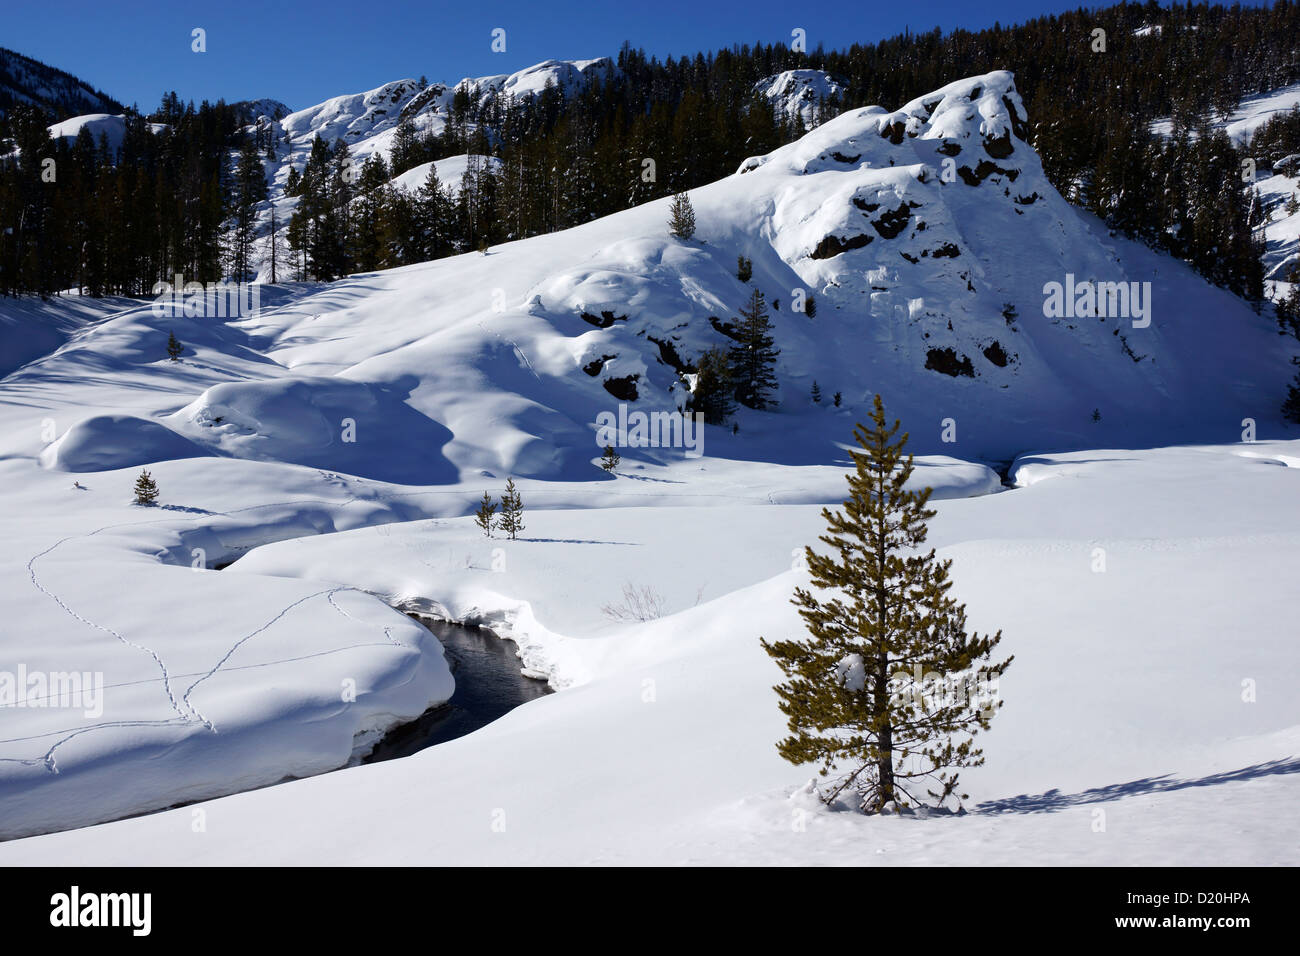 Big Wood river, winter, Sawtooth national Forest and Recreation area,, Idaho, USA Stock Photo